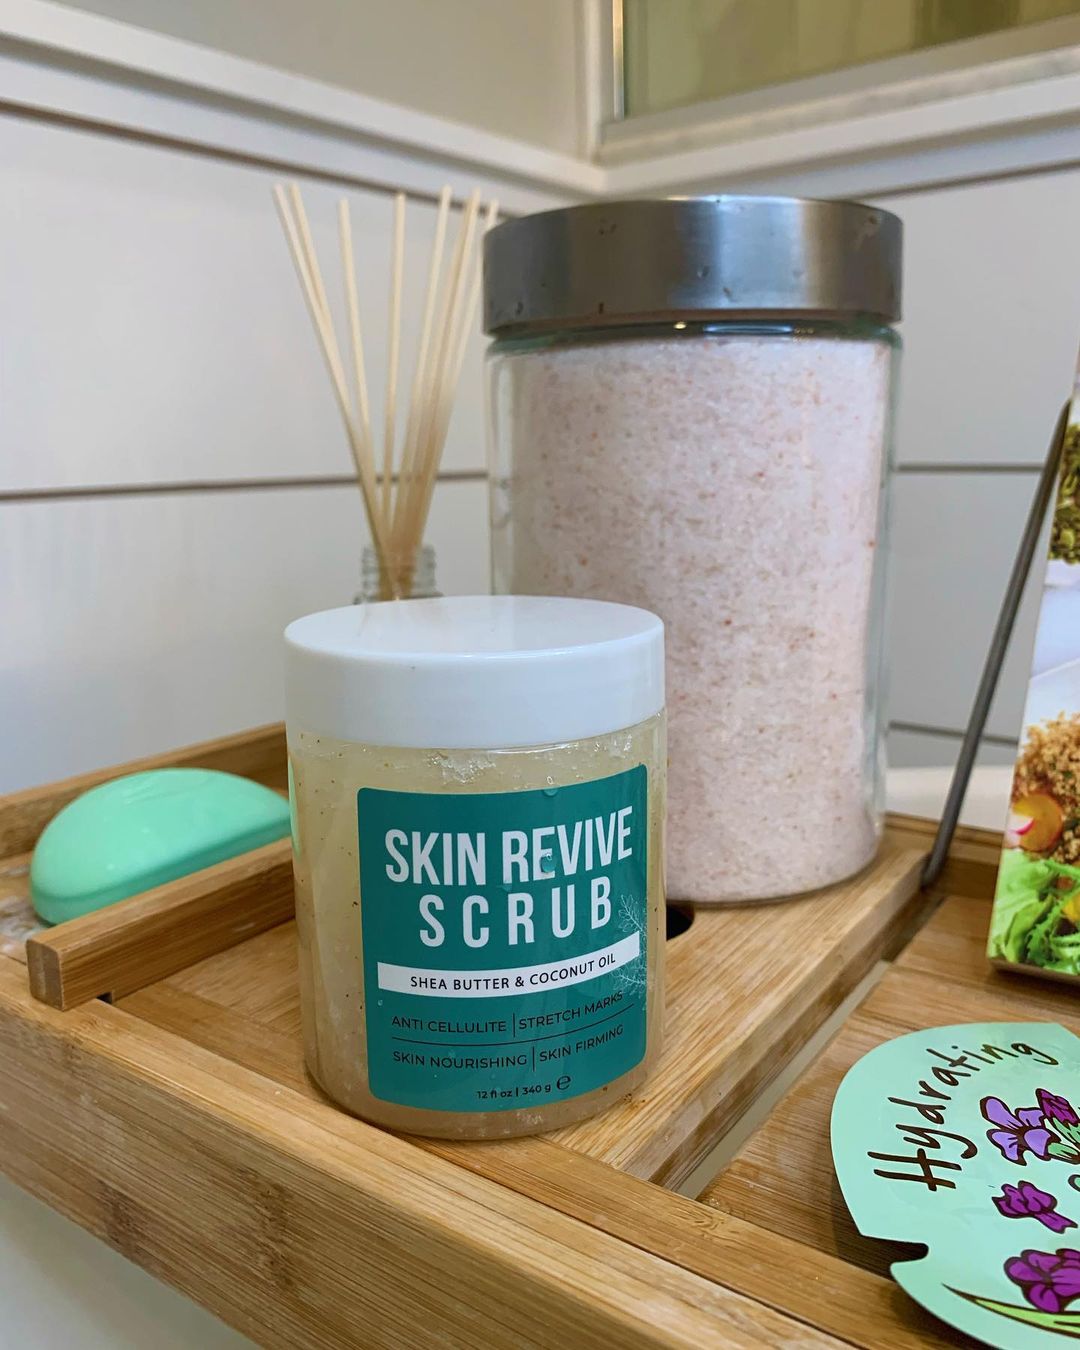 How To Use Body Scrub (Feat. Skin Revive)